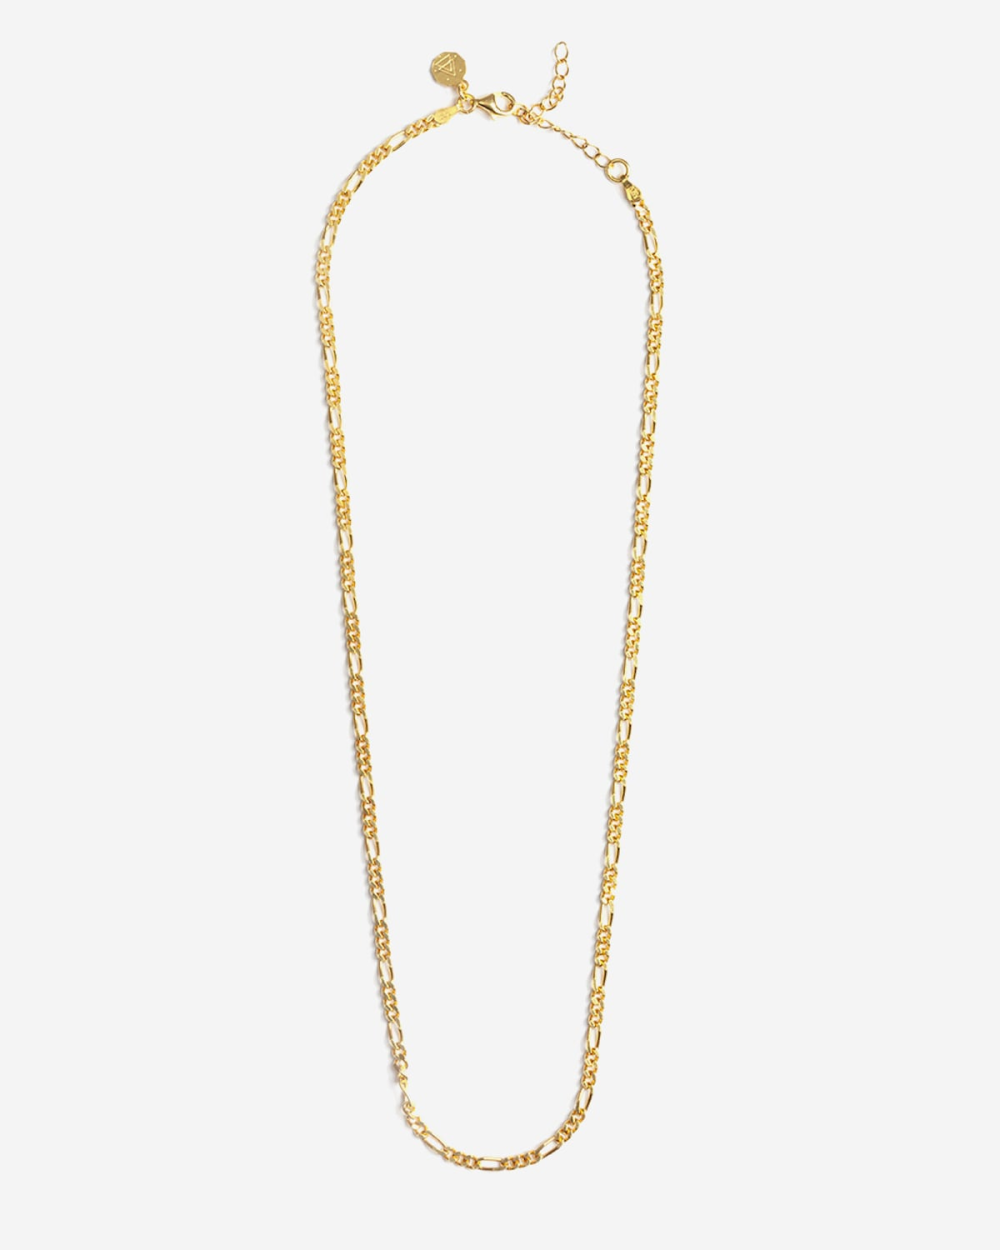 YELLOW GOLD 3+1 CURB CHAIN NECKLACE